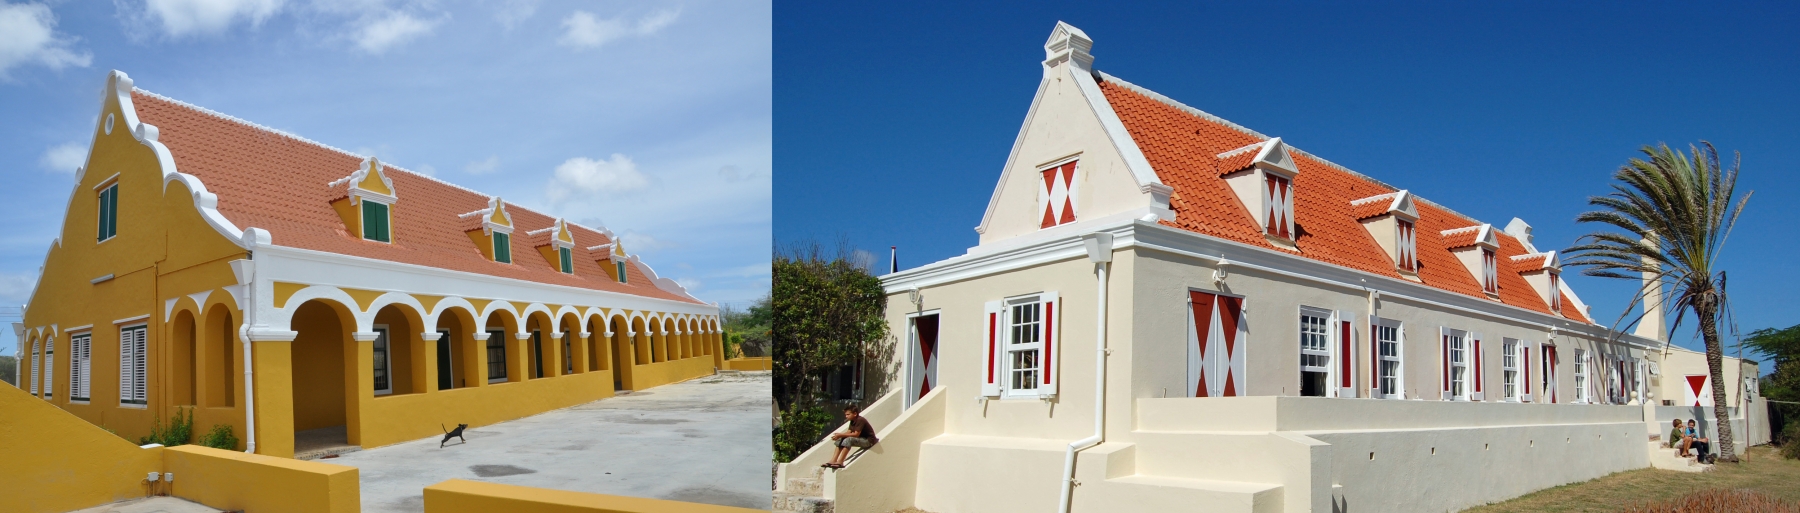 A landhuis is a colonial country house. They were&nbsp;replicas of Dutch architecture&nbsp;imported to&nbsp;Cura&ccedil;ao. De Beijer is interested in their historical role as&nbsp;&quot;cultural coccoons&quot;, insulating colonialists on the island.